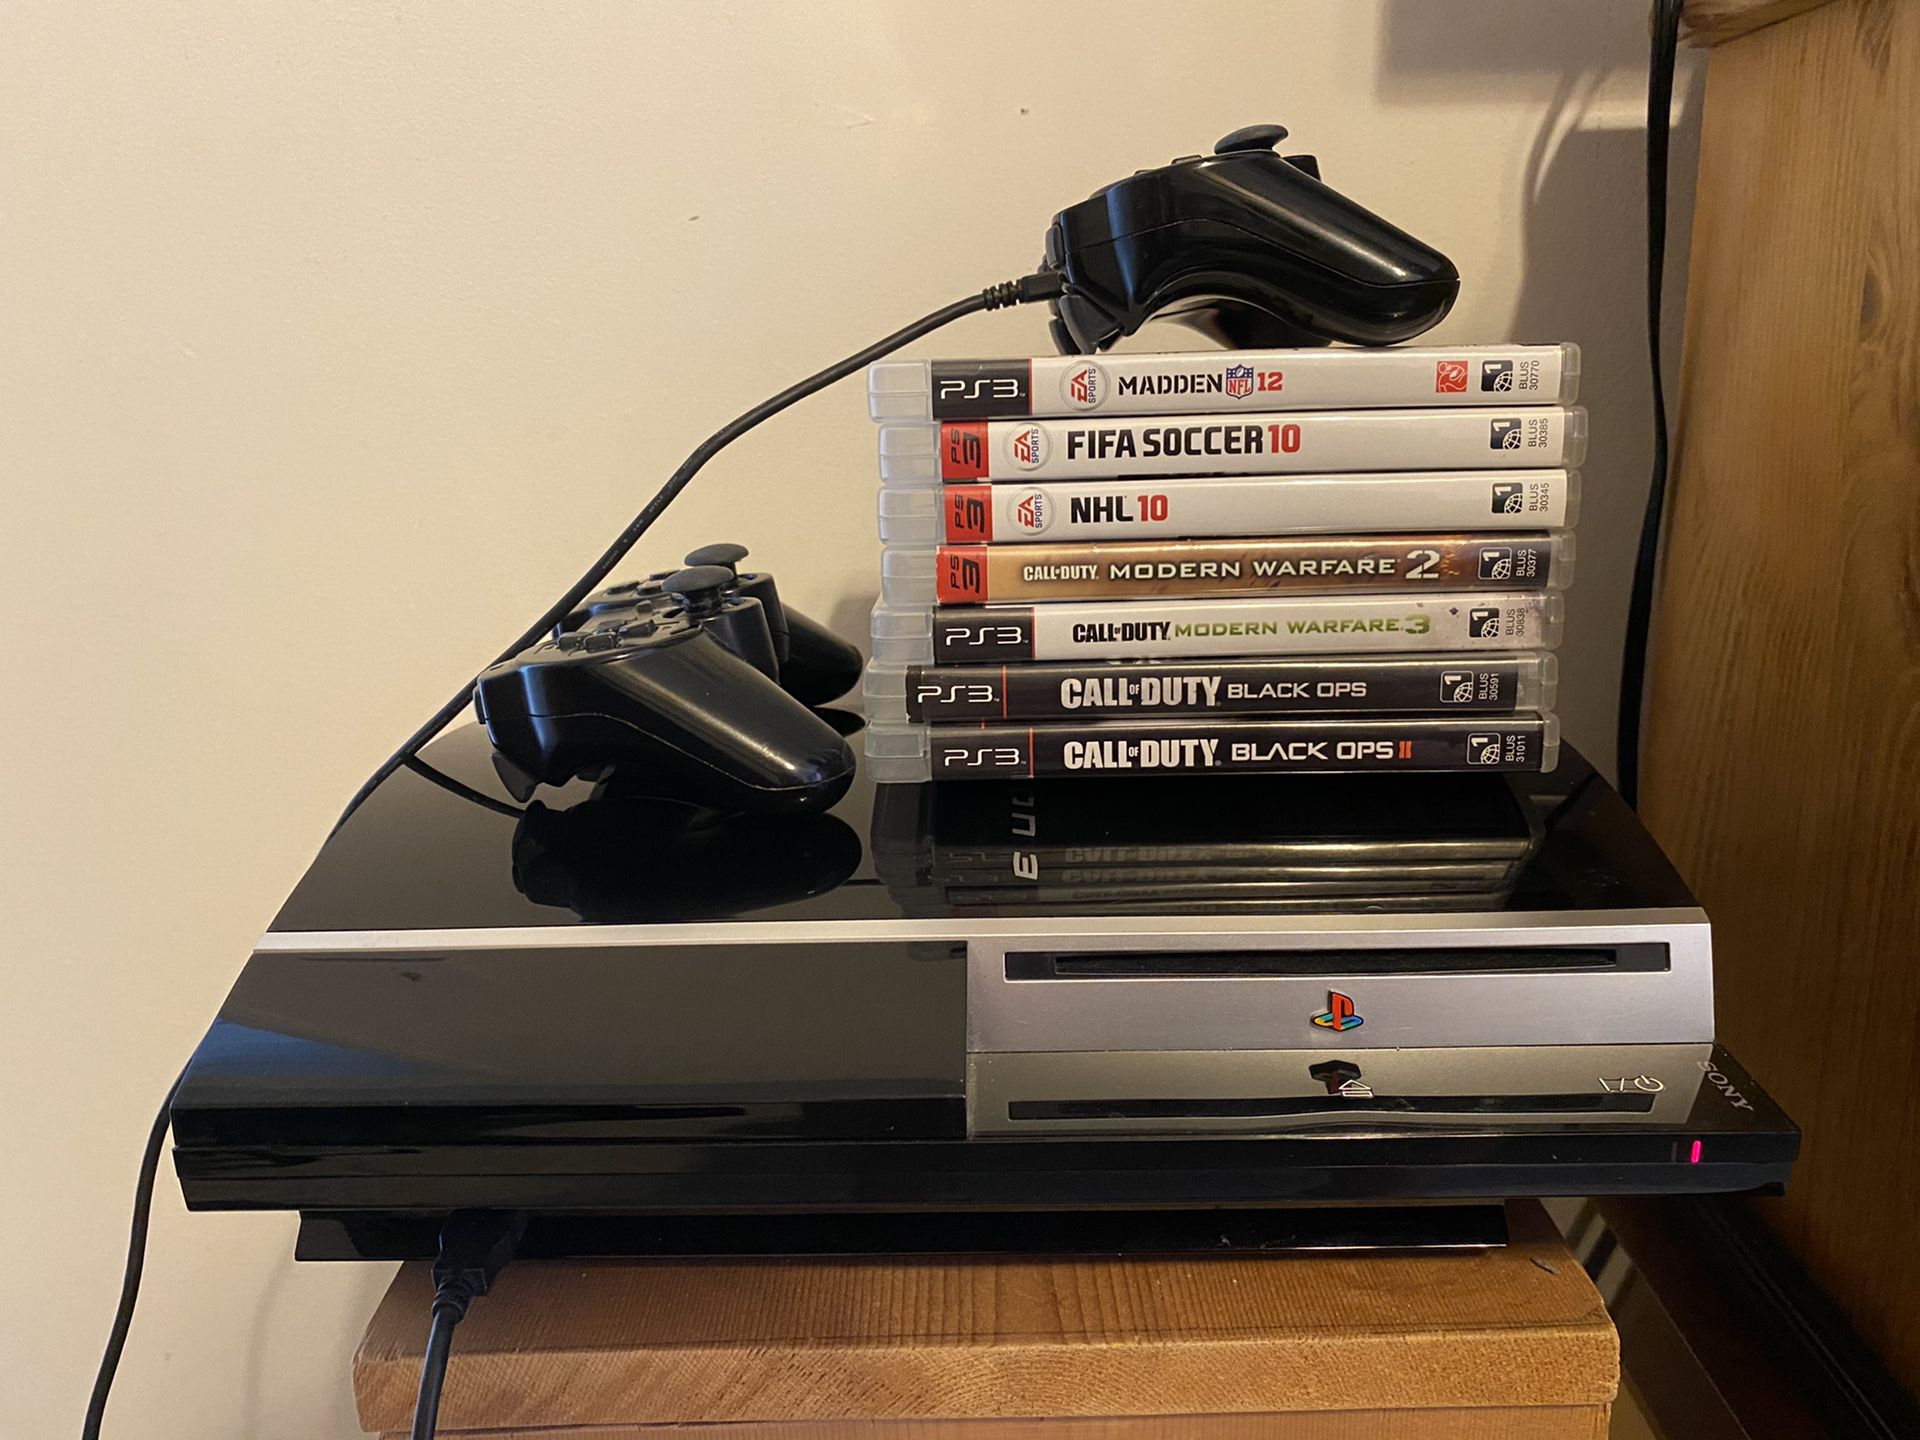 PlayStation 3 - 2 controllers and games included